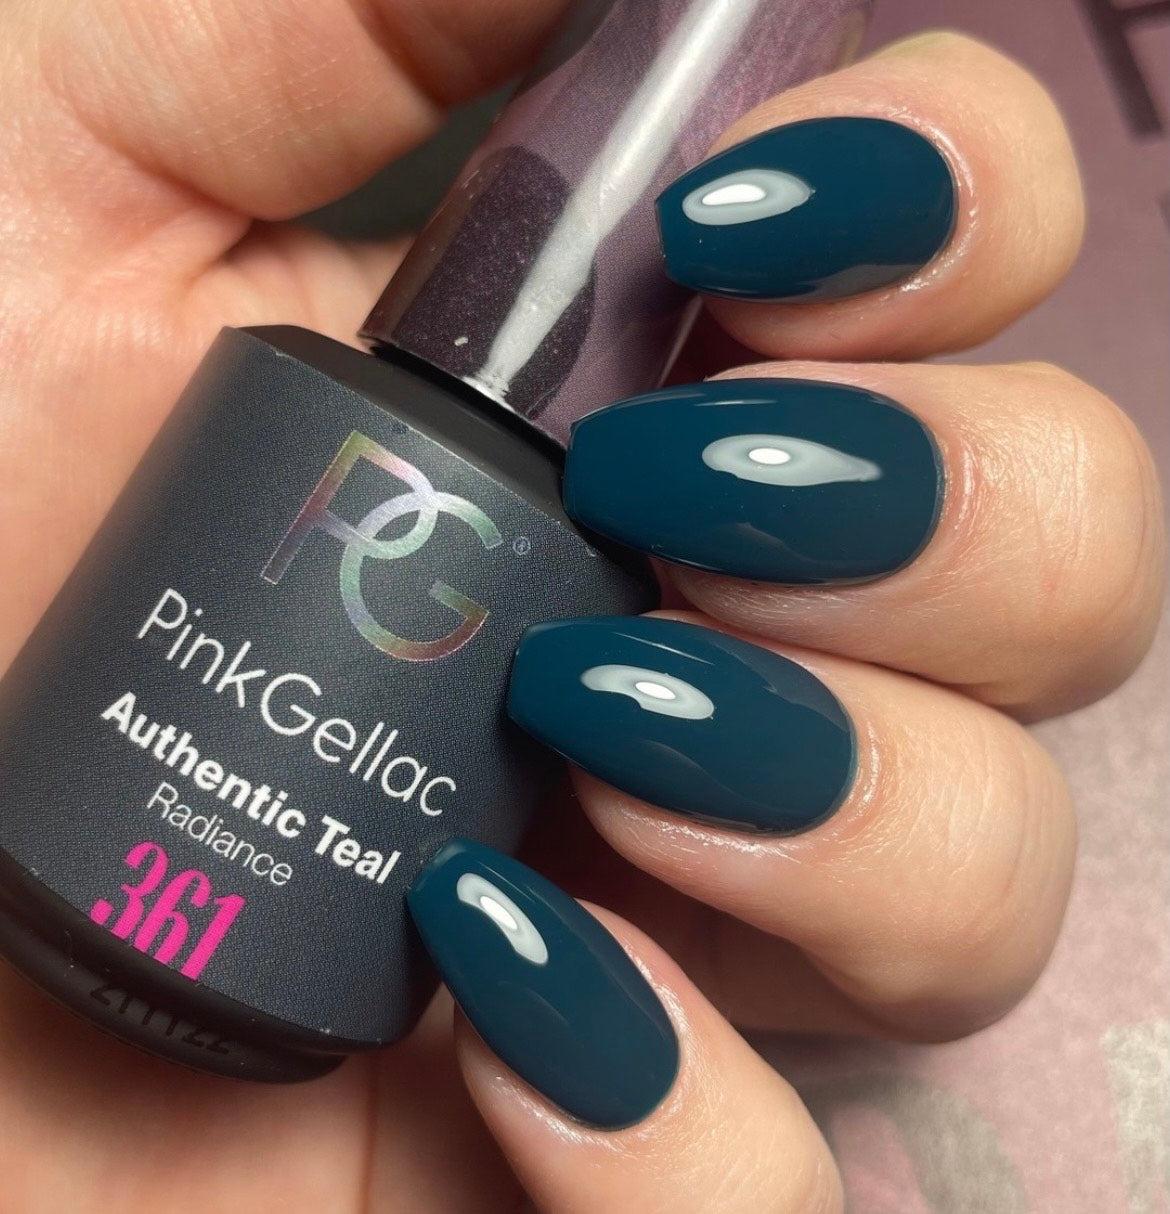 Nails Inc. Magnetic Nail Polish Manicure - Whitehall Teal - Blue Skies for  Me Please